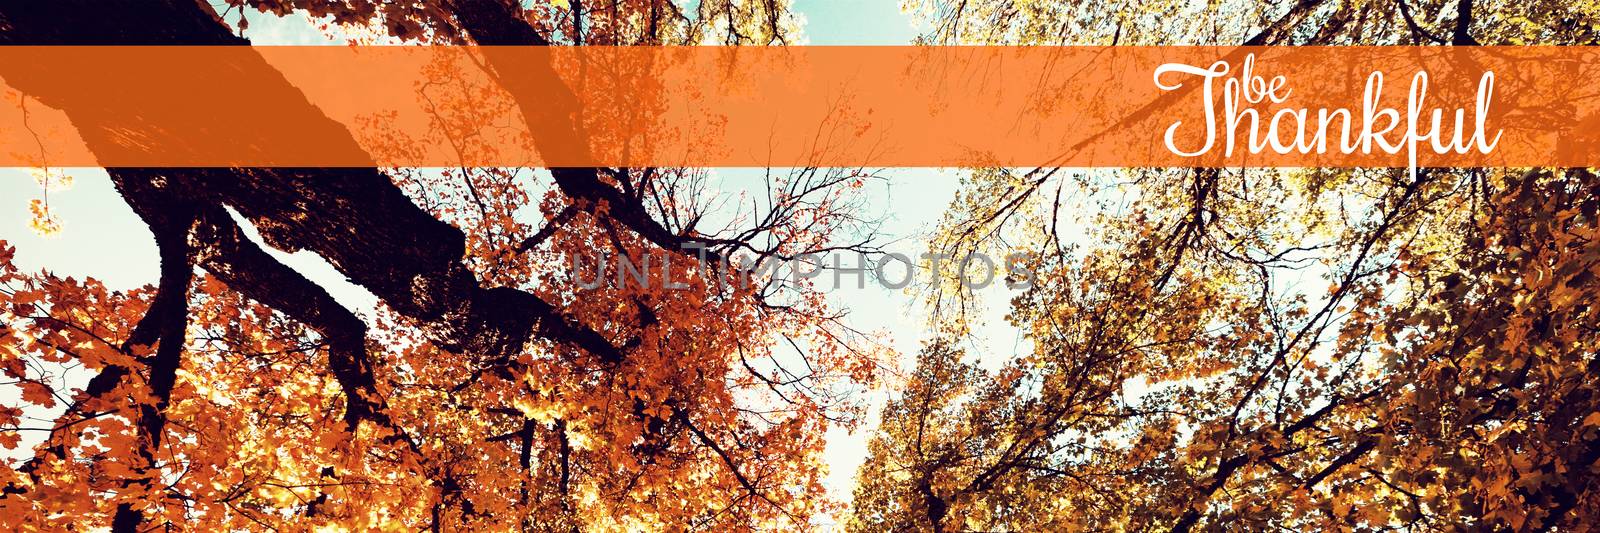 Thanksgiving greeting text against  low angle view of trees against blue sky